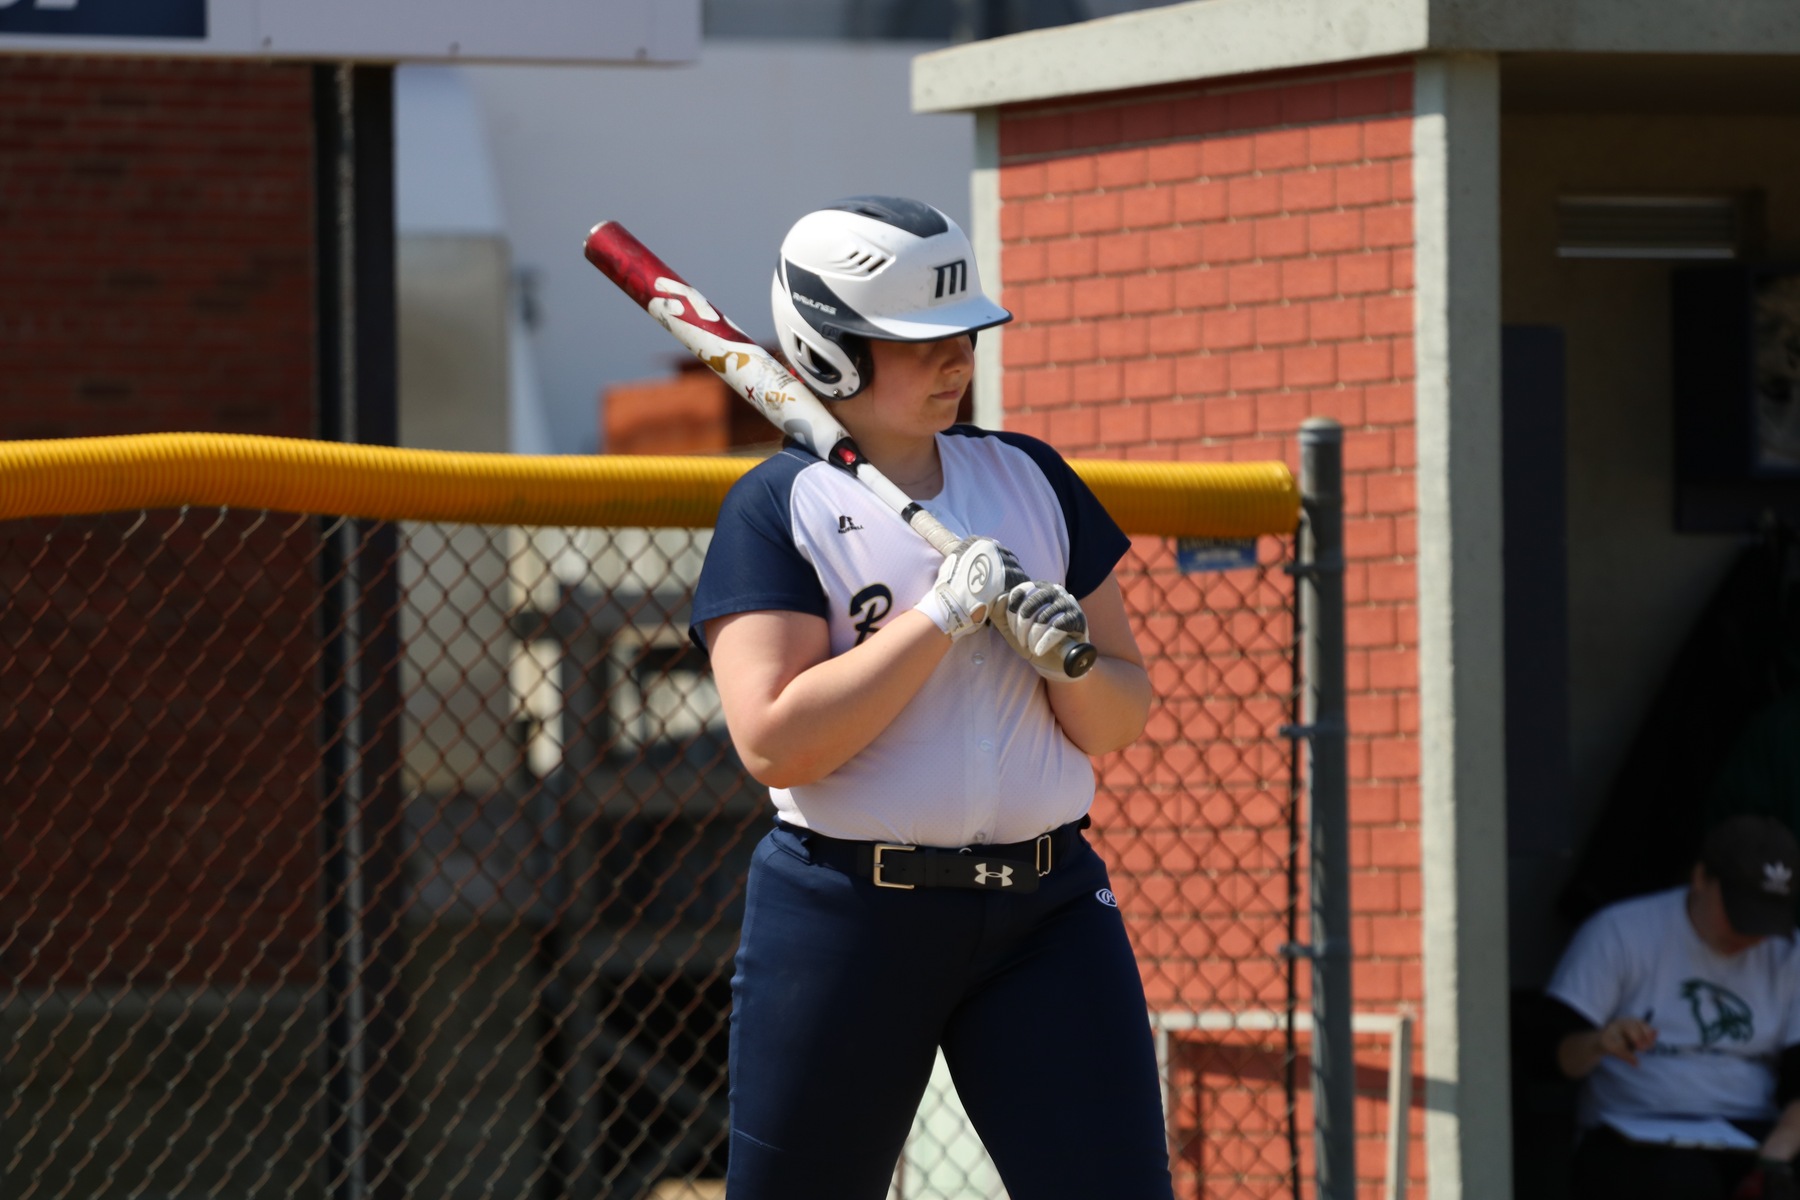 Buccaneers Swept by MCLA in MASCAC Doubleheader